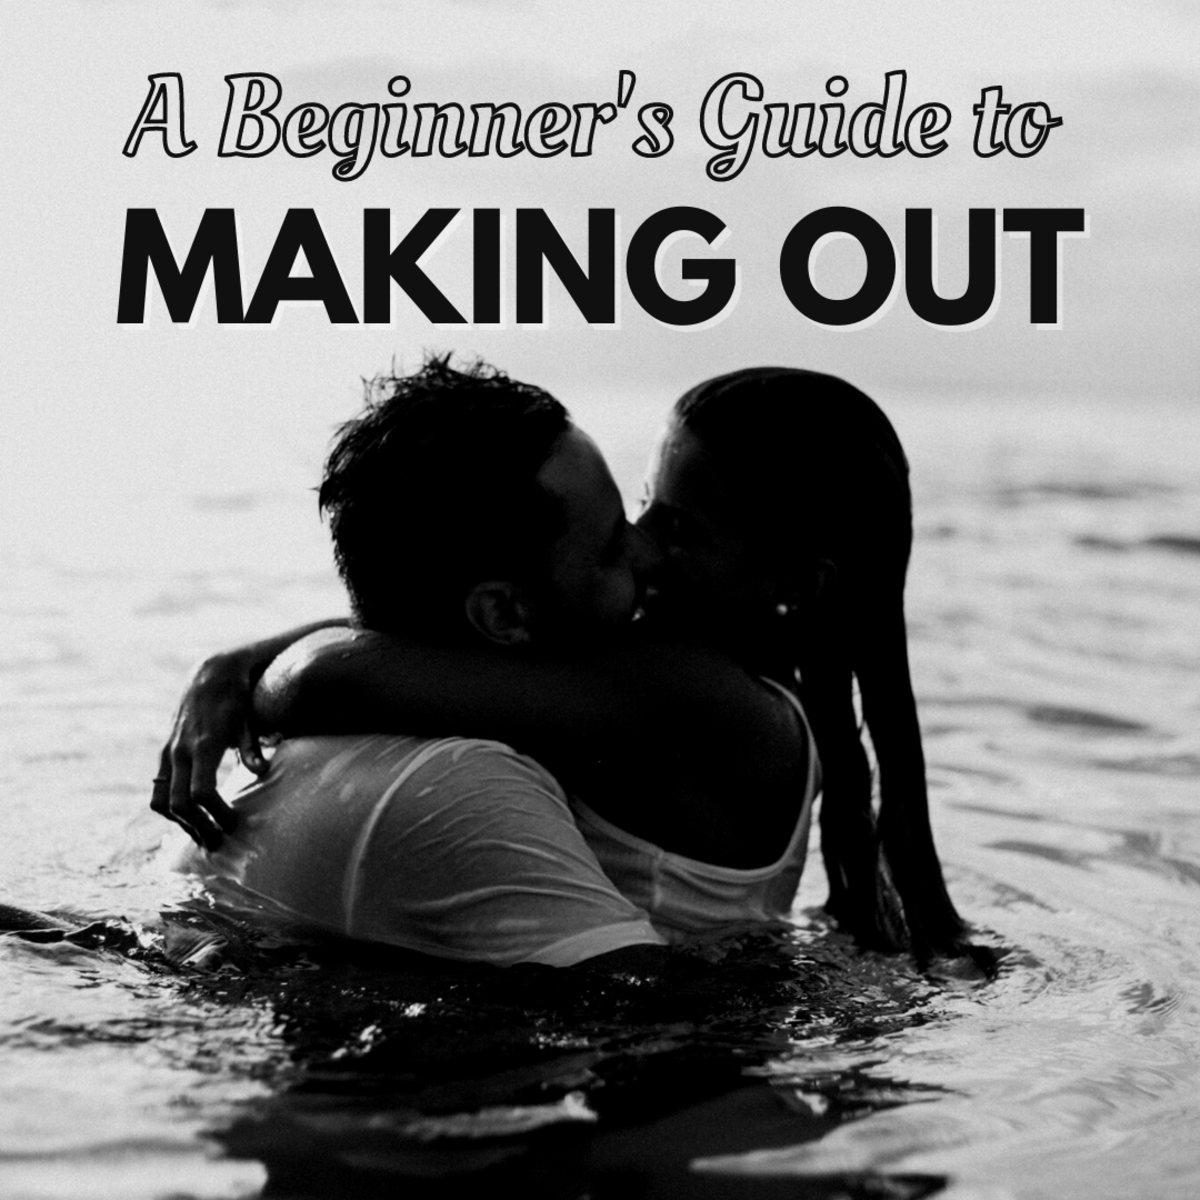 Learn How to Make Out